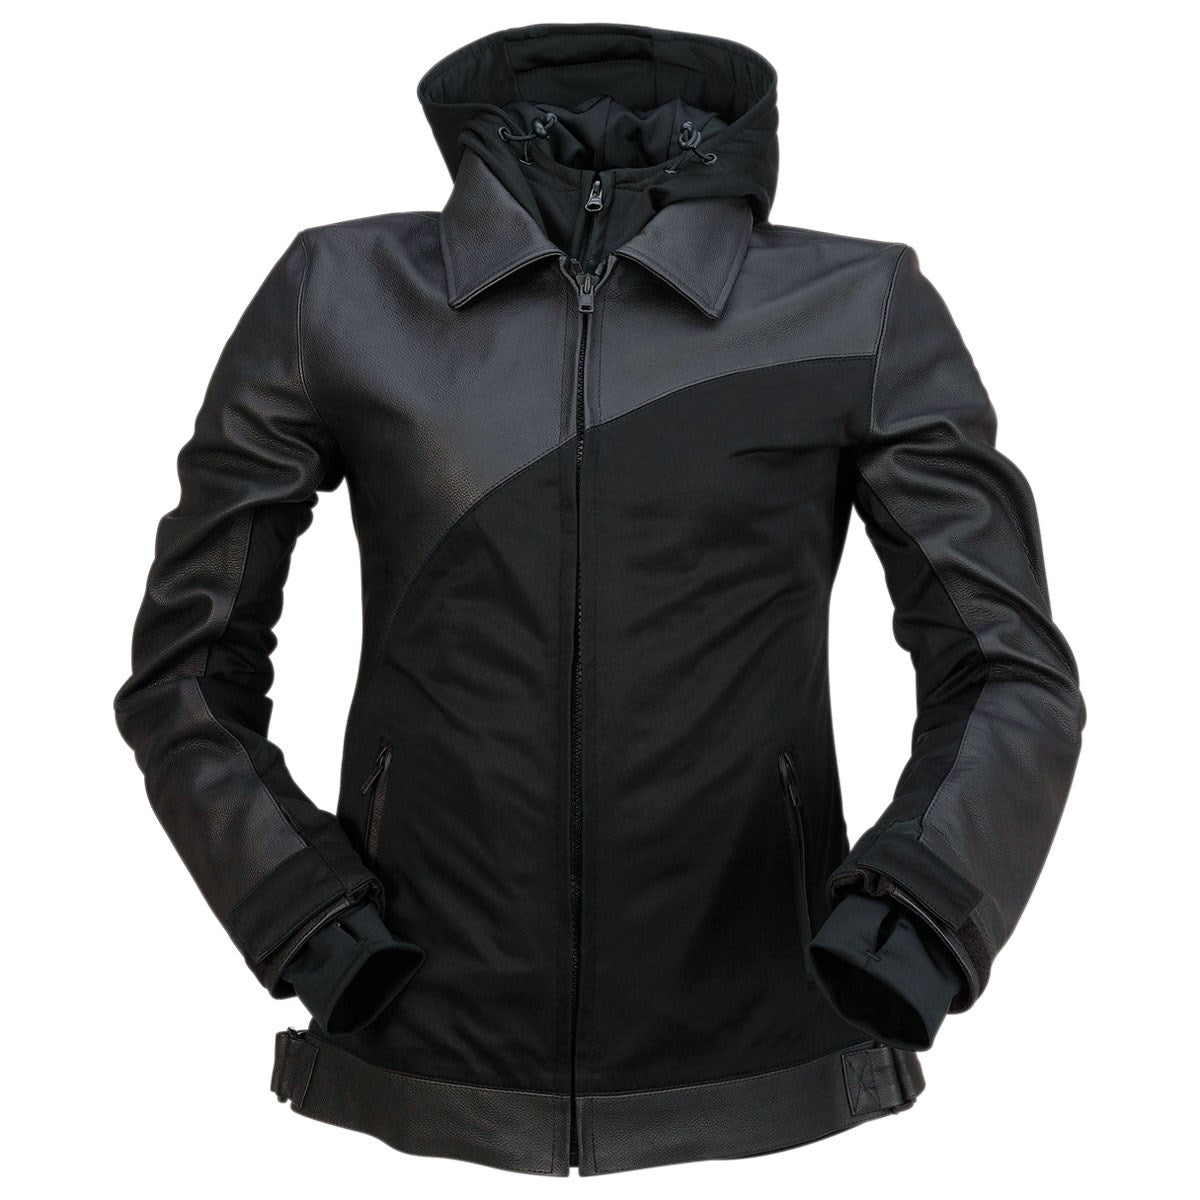 Z1R Womens 35 Special Leather Jacket